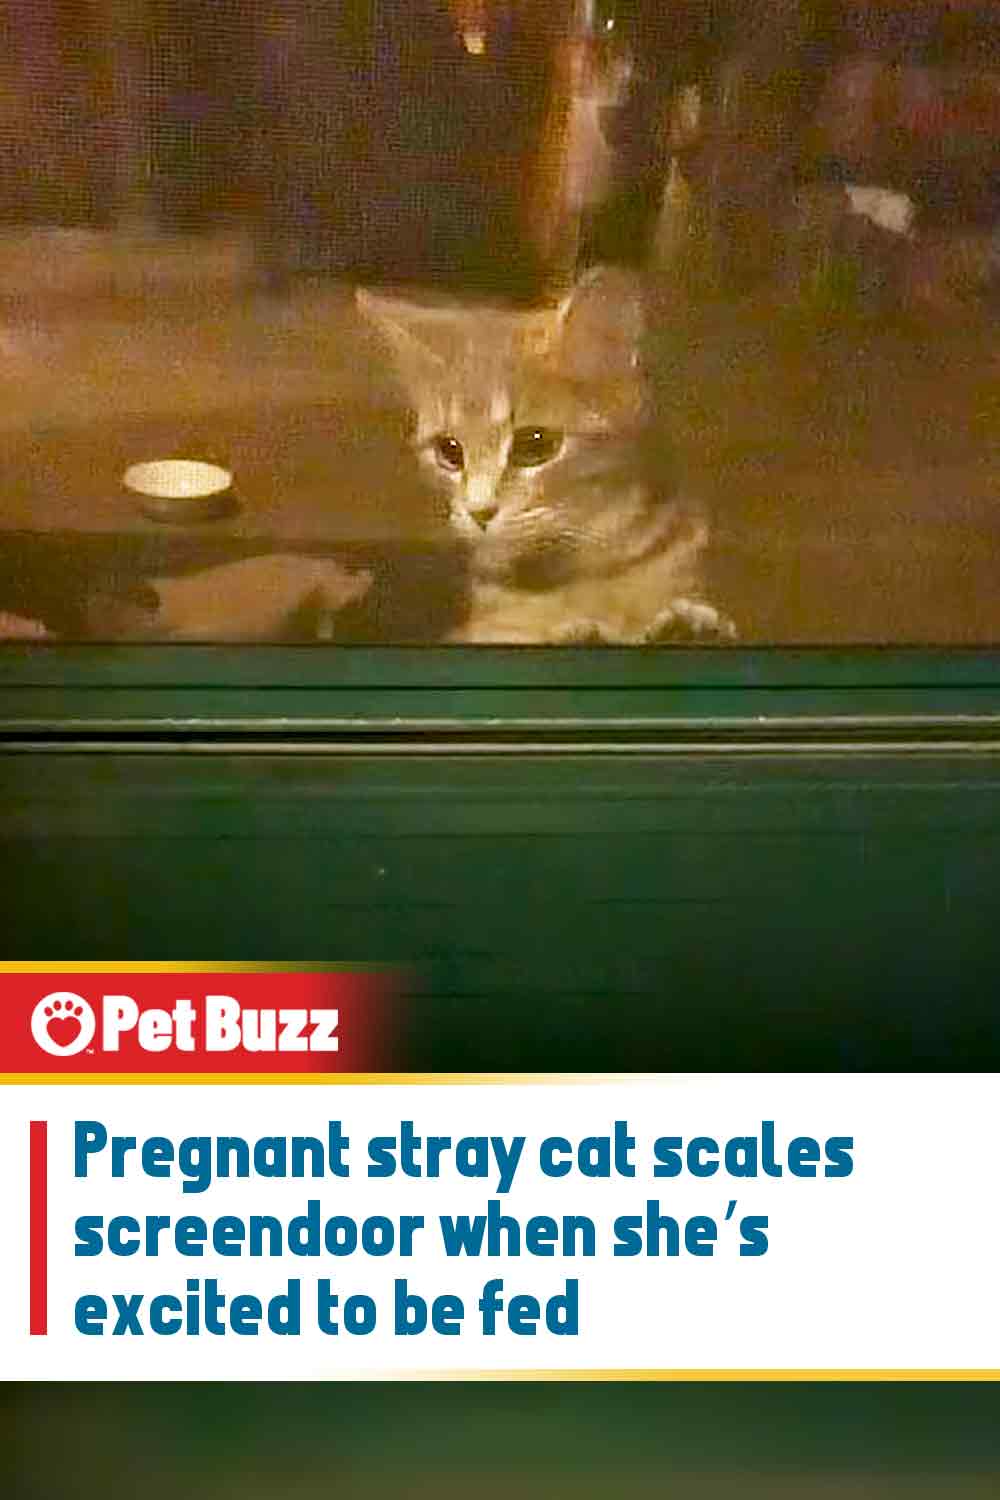 Pregnant stray cat scales screendoor when she’s excited to be fed